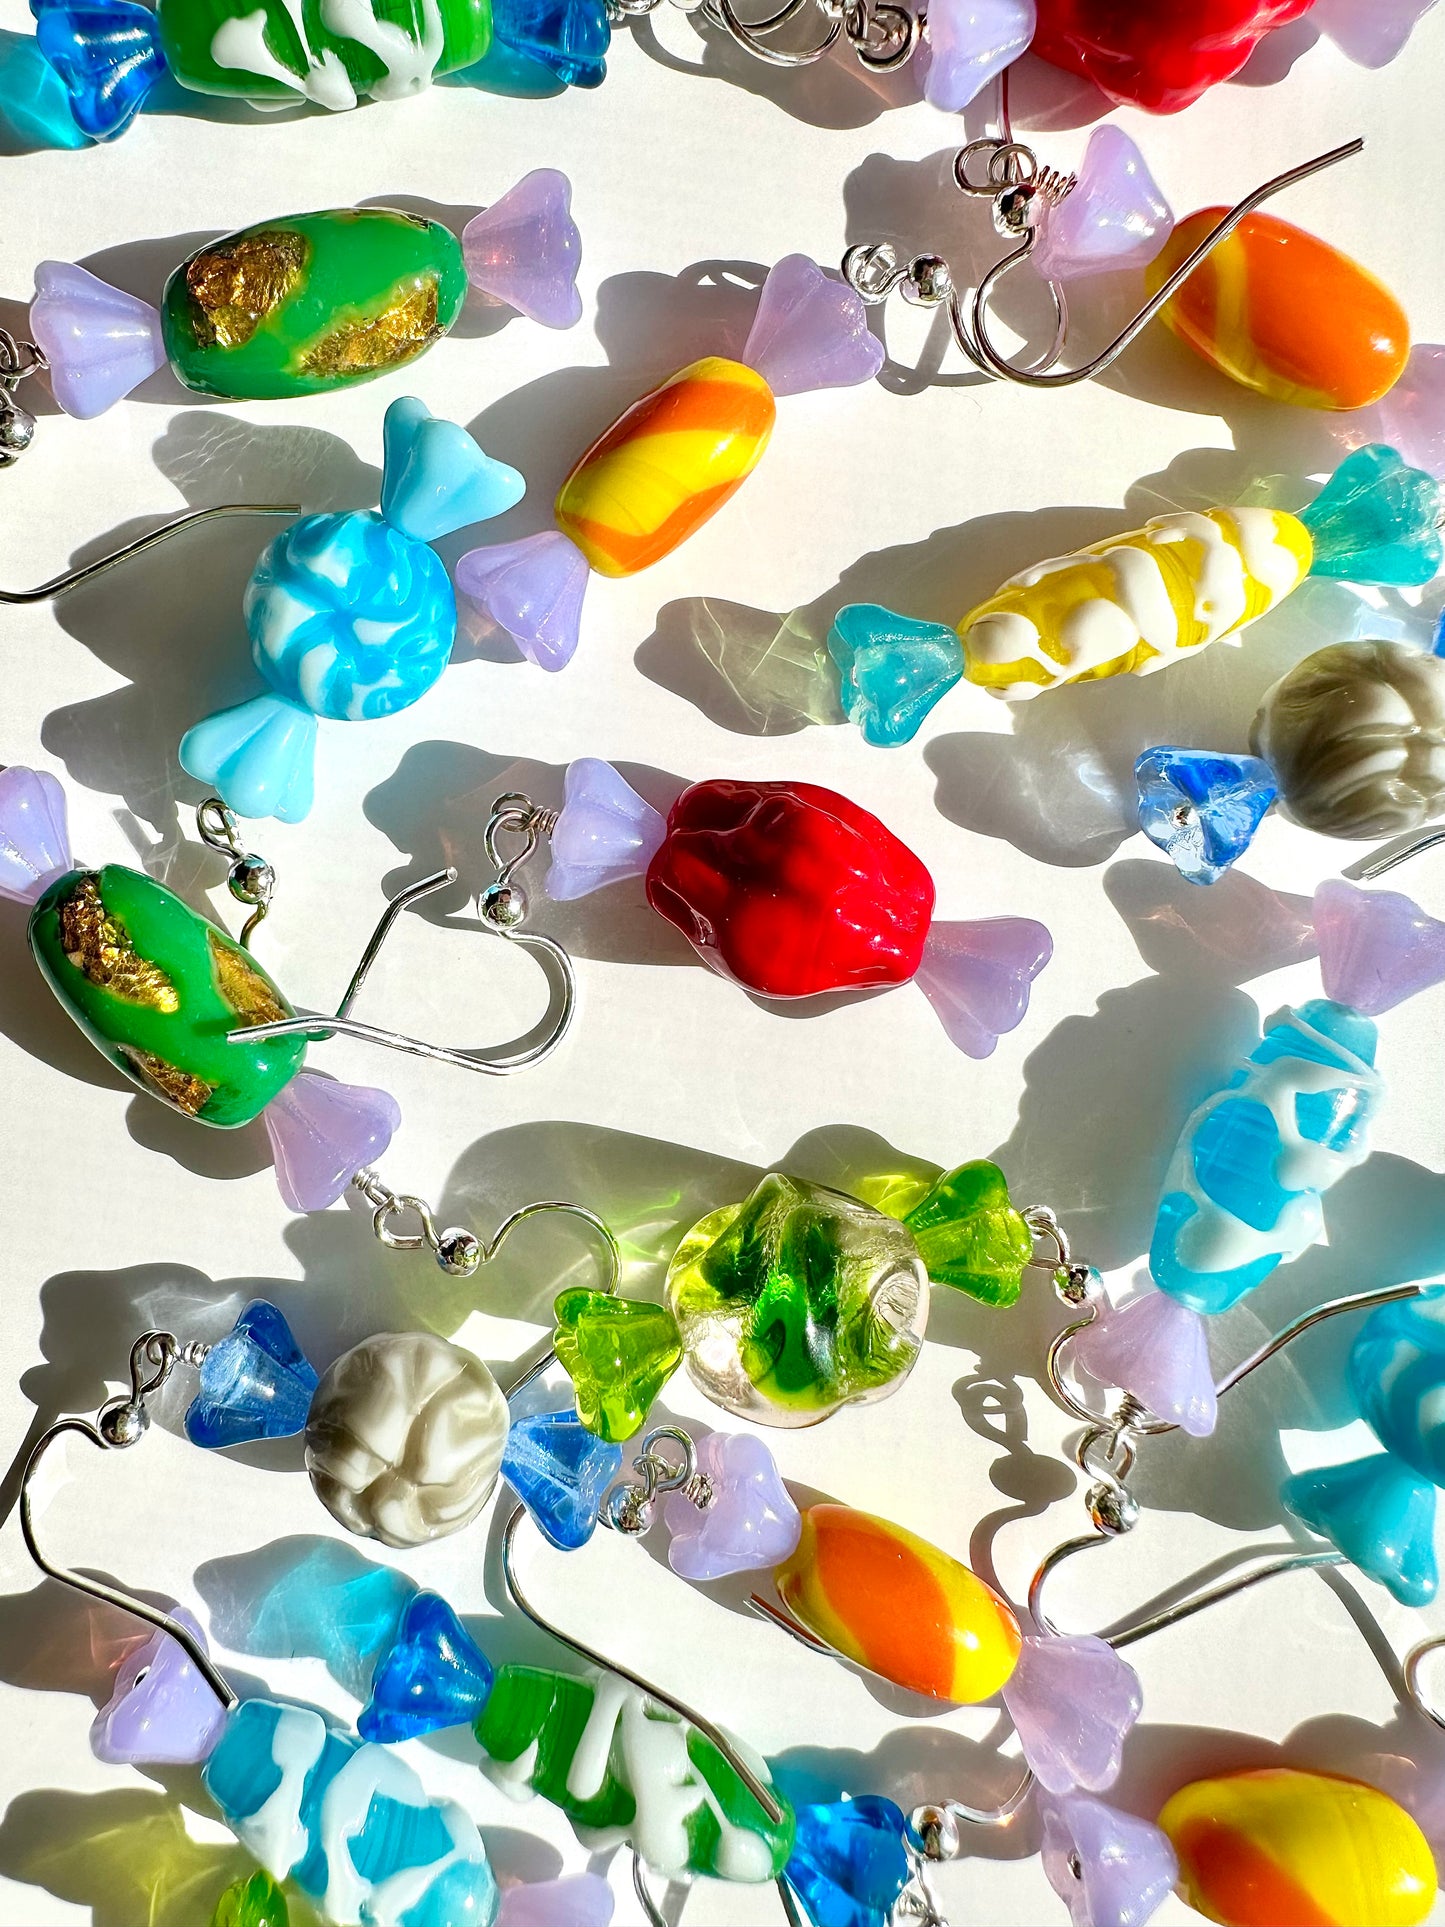 Gooselumps: 💙🦠🍬 SMURF BOOGER CANDY EARRINGS 🍬🦠💙